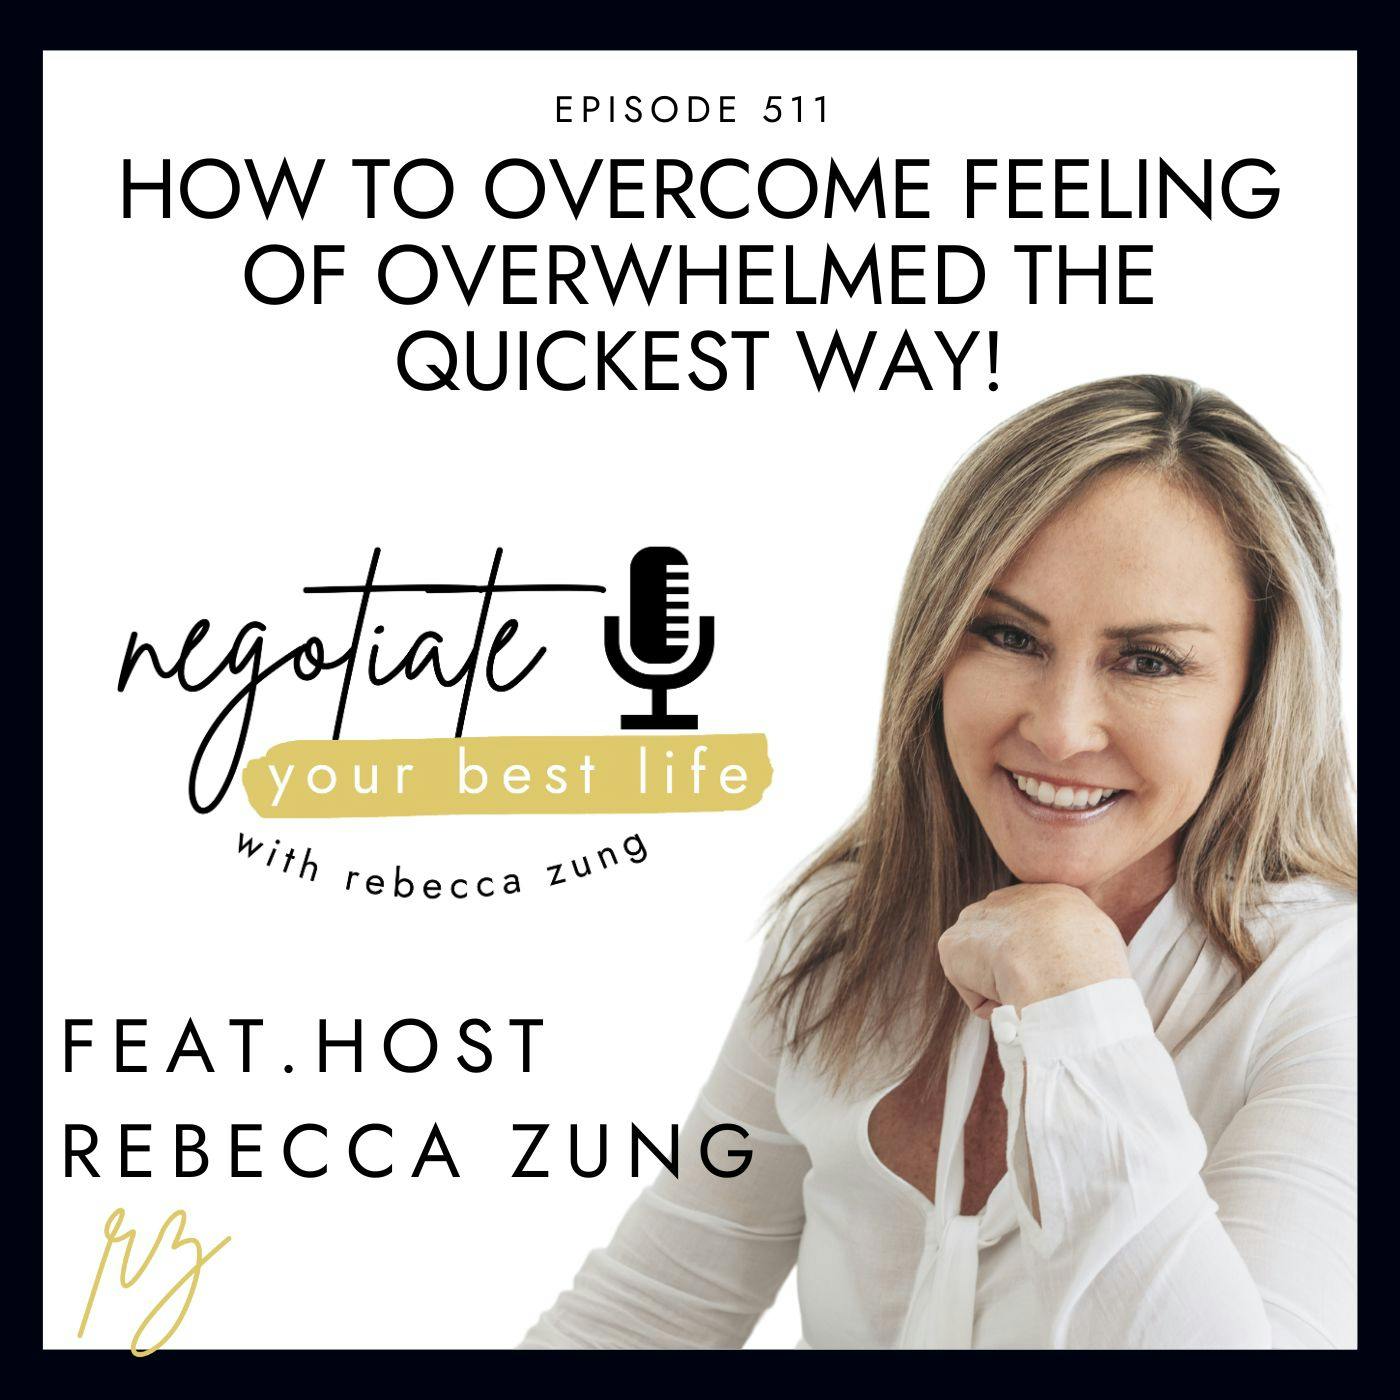 How to Overcome Feeling of Overwhelmed, the QUICKEST way!  with Rebecca Zung on Negotiate Your Best Life #511